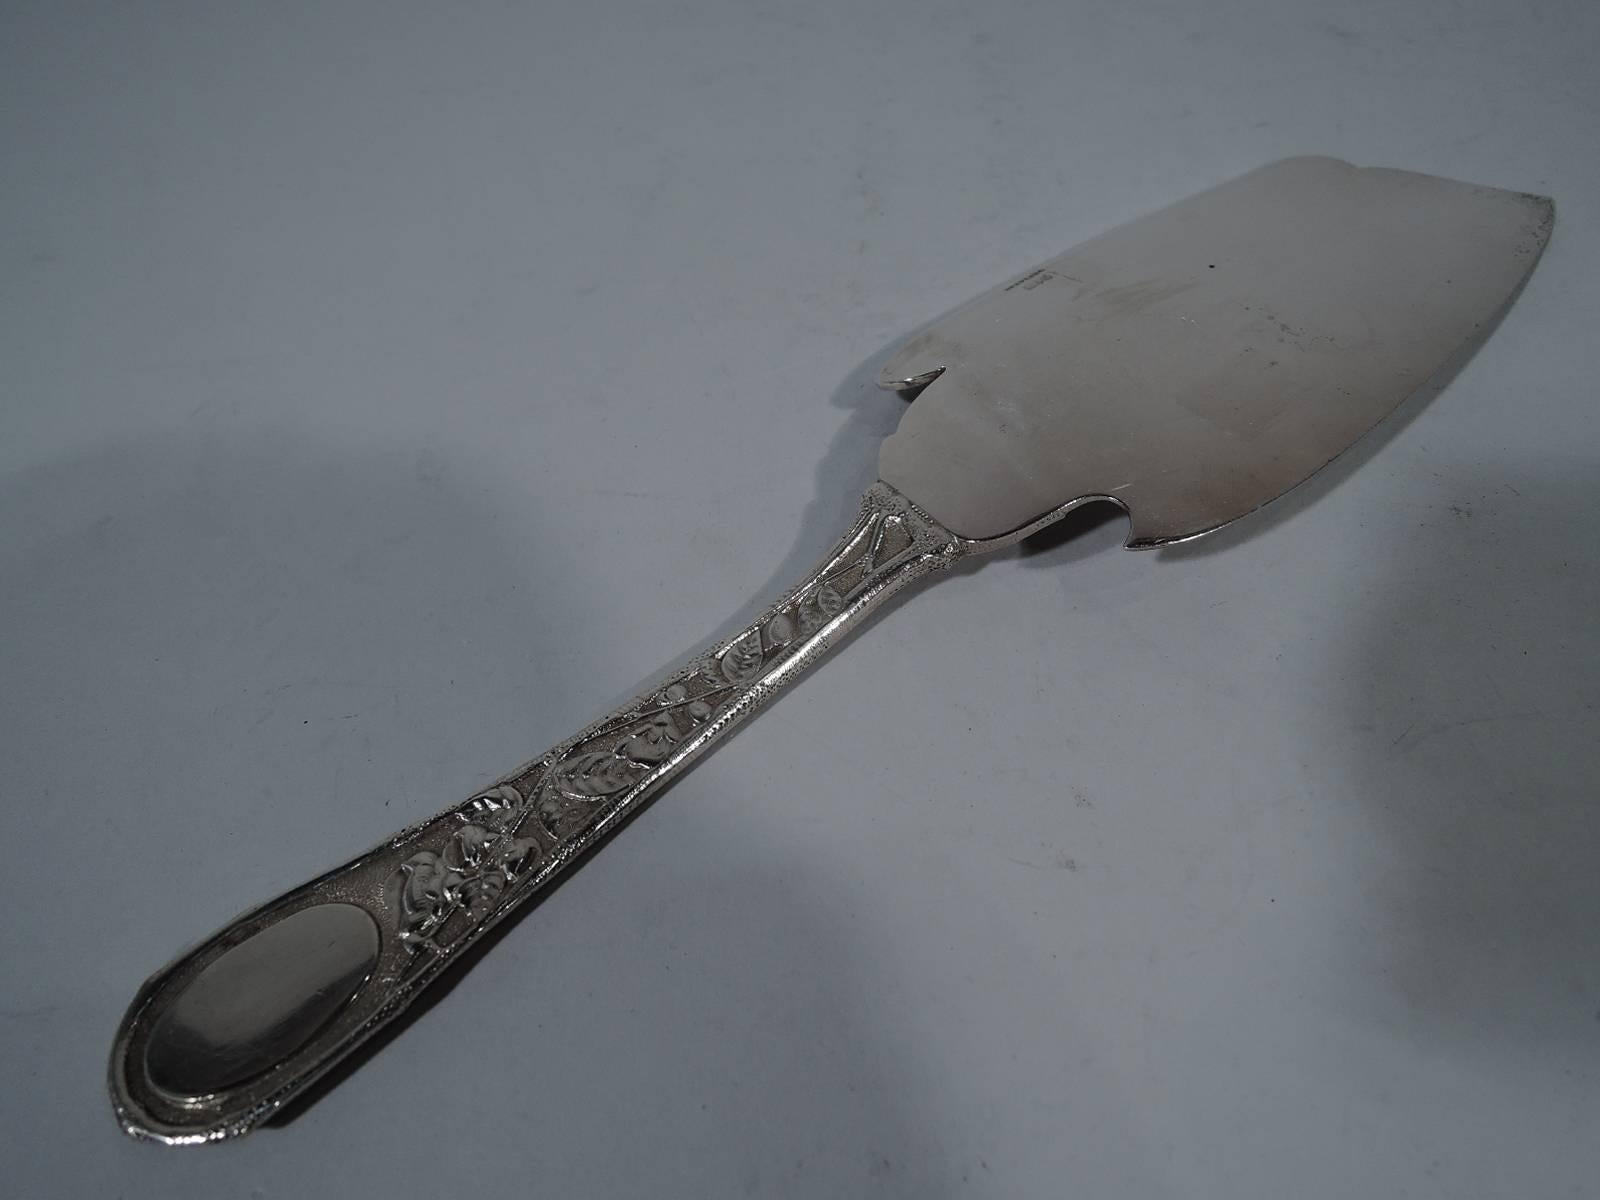 Antique sterling silver fish slice in Eglantine pattern. Made by Gorham in Providence. Dense repousse flowers and oval frame (vacant) on back. Shaped blade with engraved flowers. A nice piece in this early pattern, which was first produced in 1870.